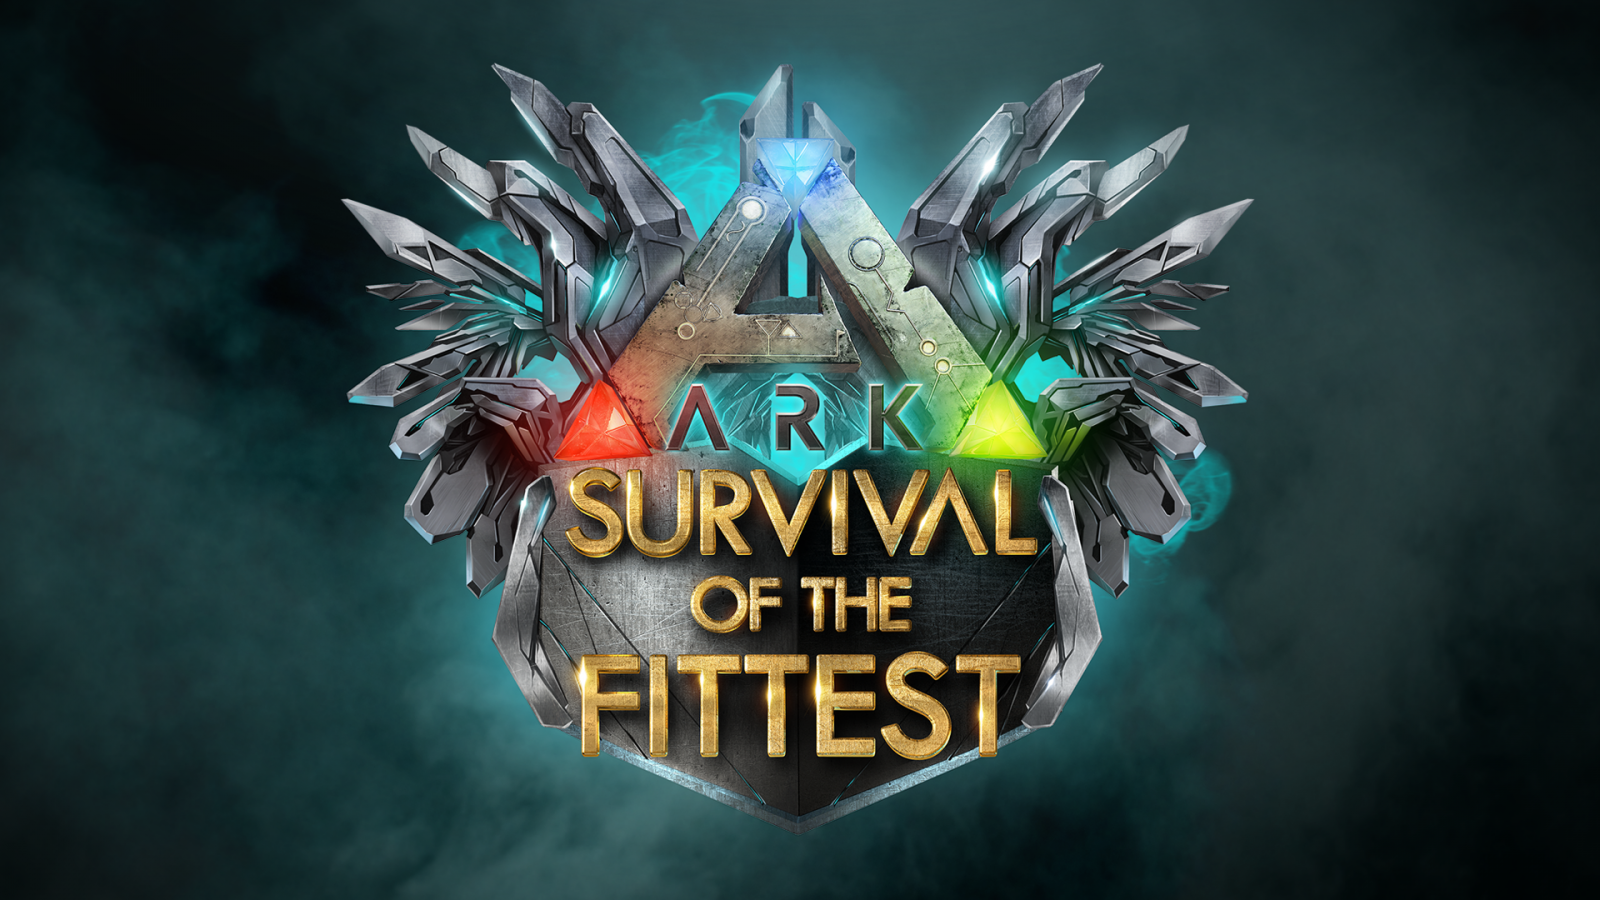 ARK Survival of the Fittest PS4 on July the 19th